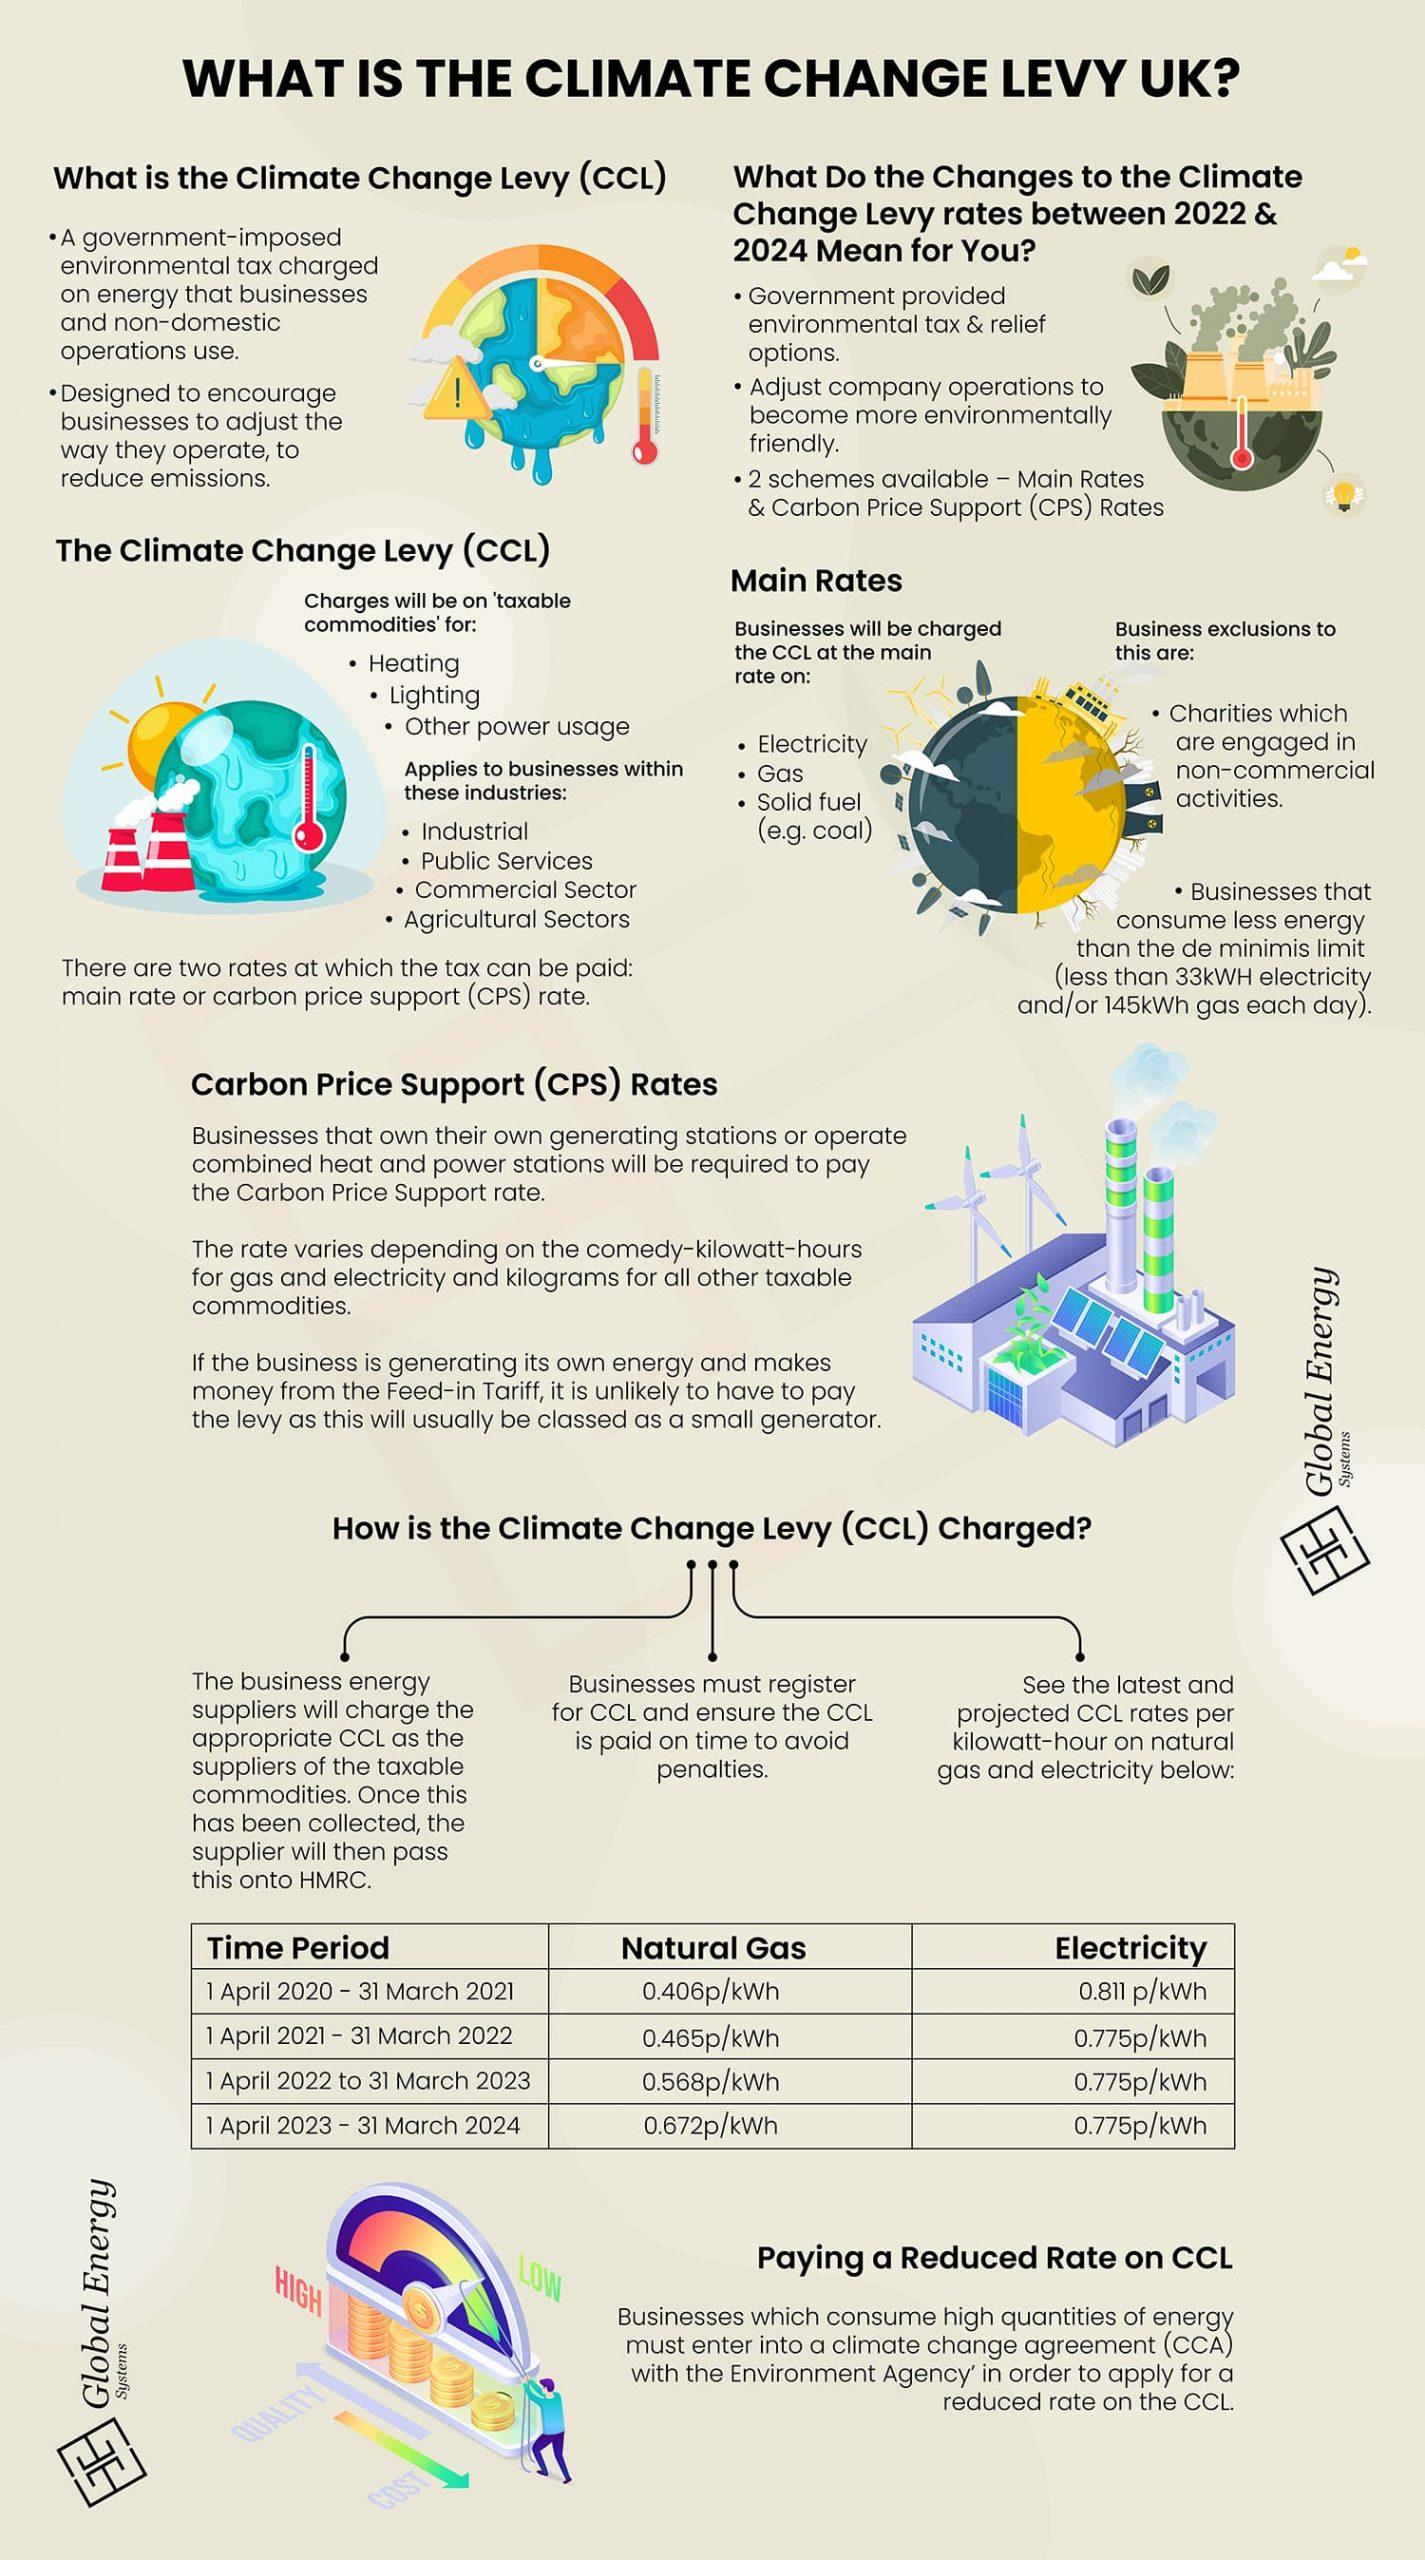 What is climate change levy?